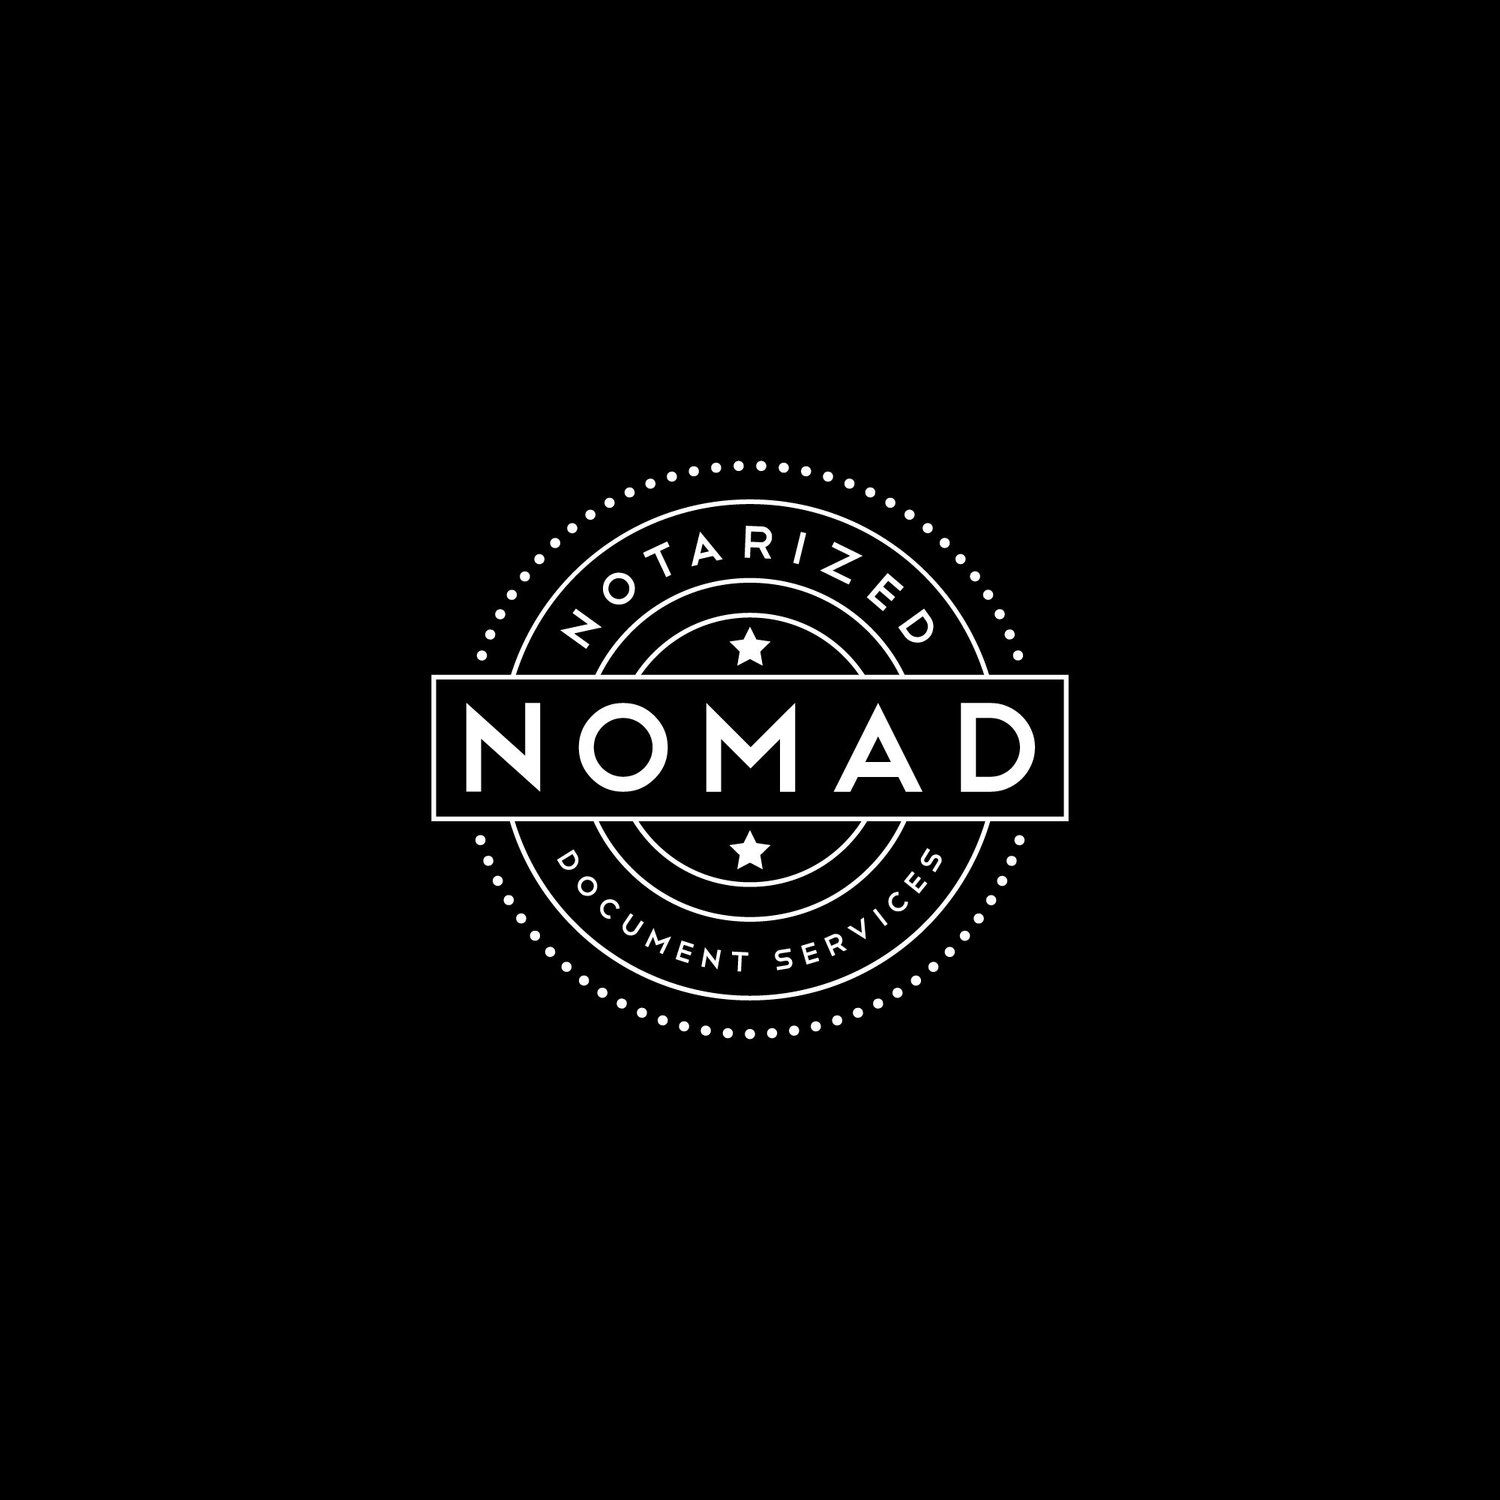 Nomad Notarized Document Services